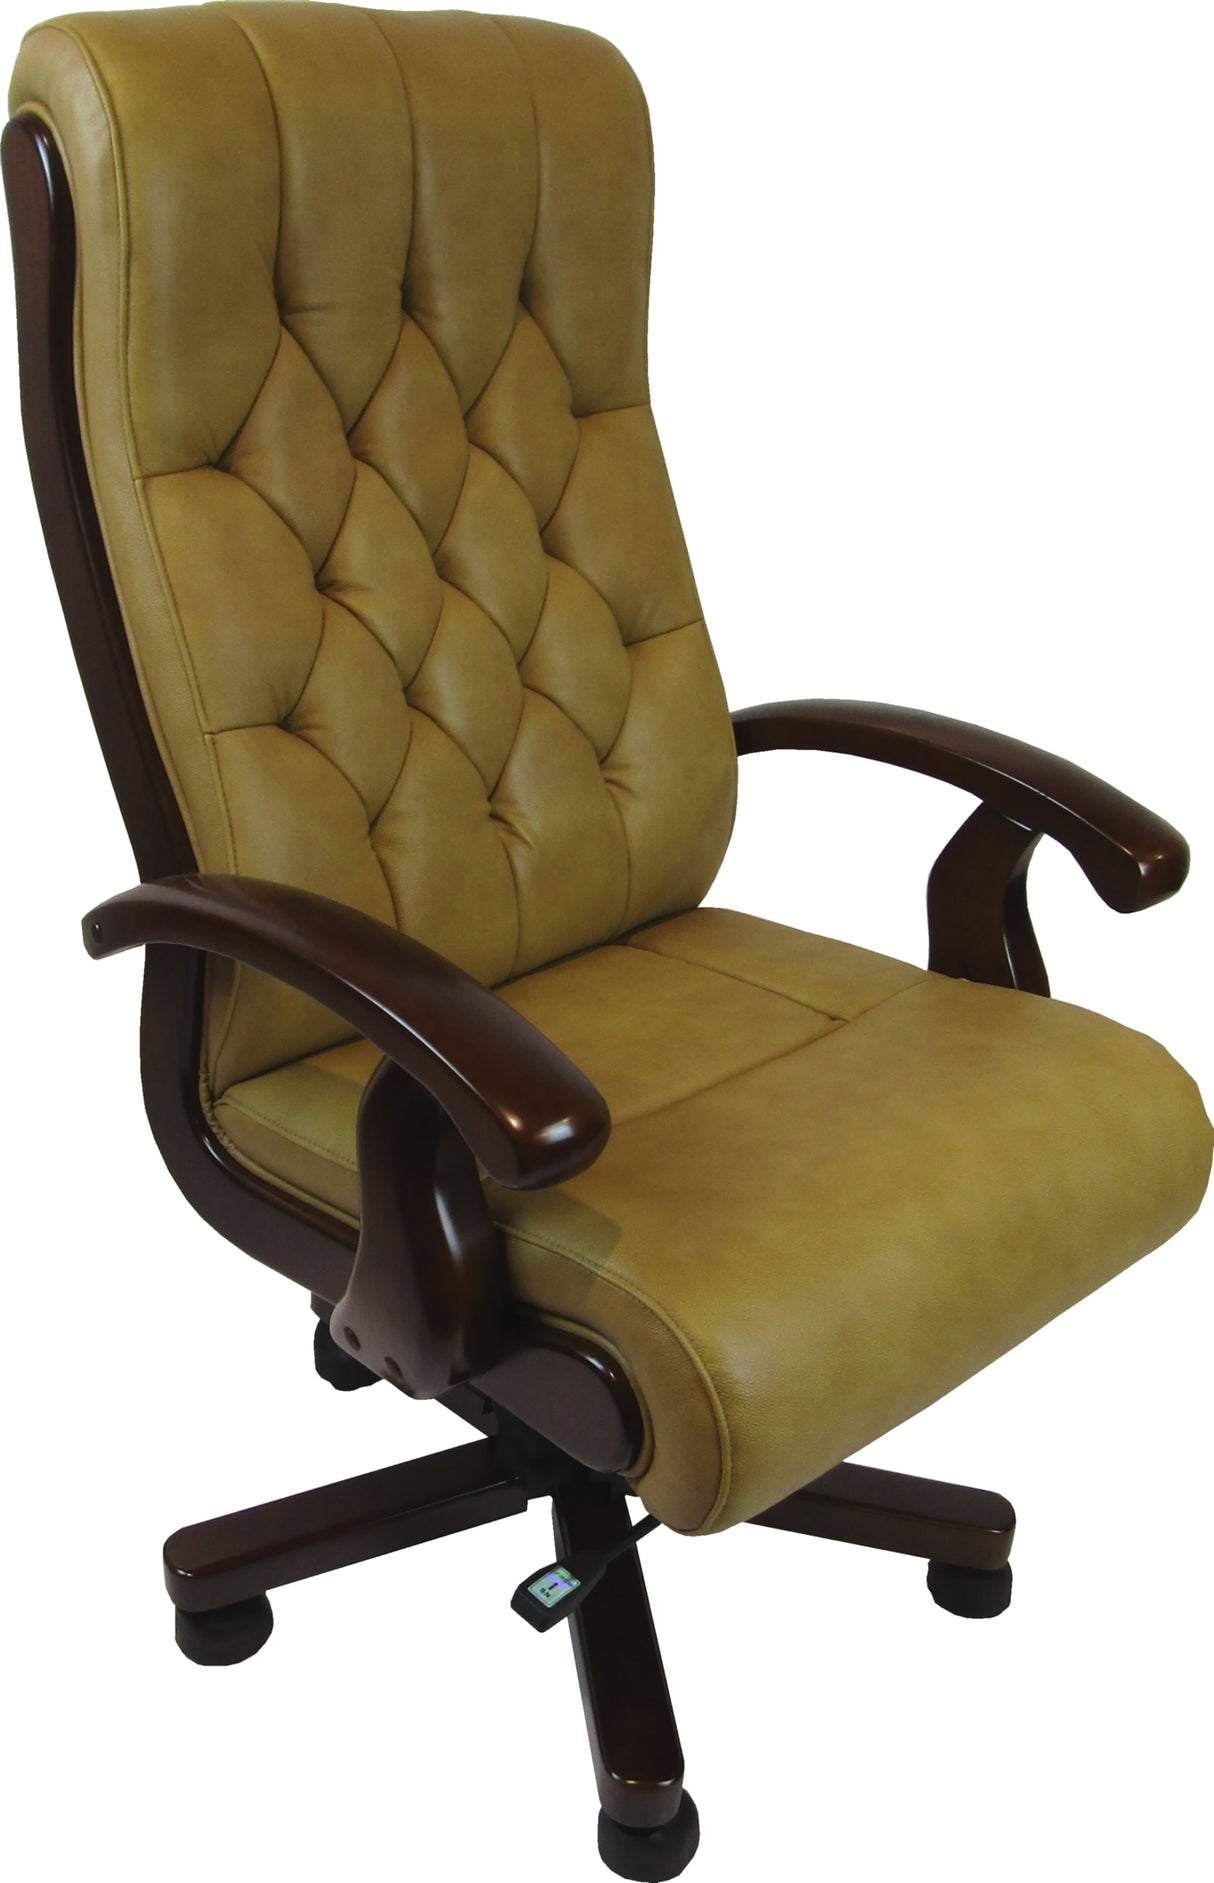 Beige Leather Chesterfield Executive Office Chair - CHA-WS-917